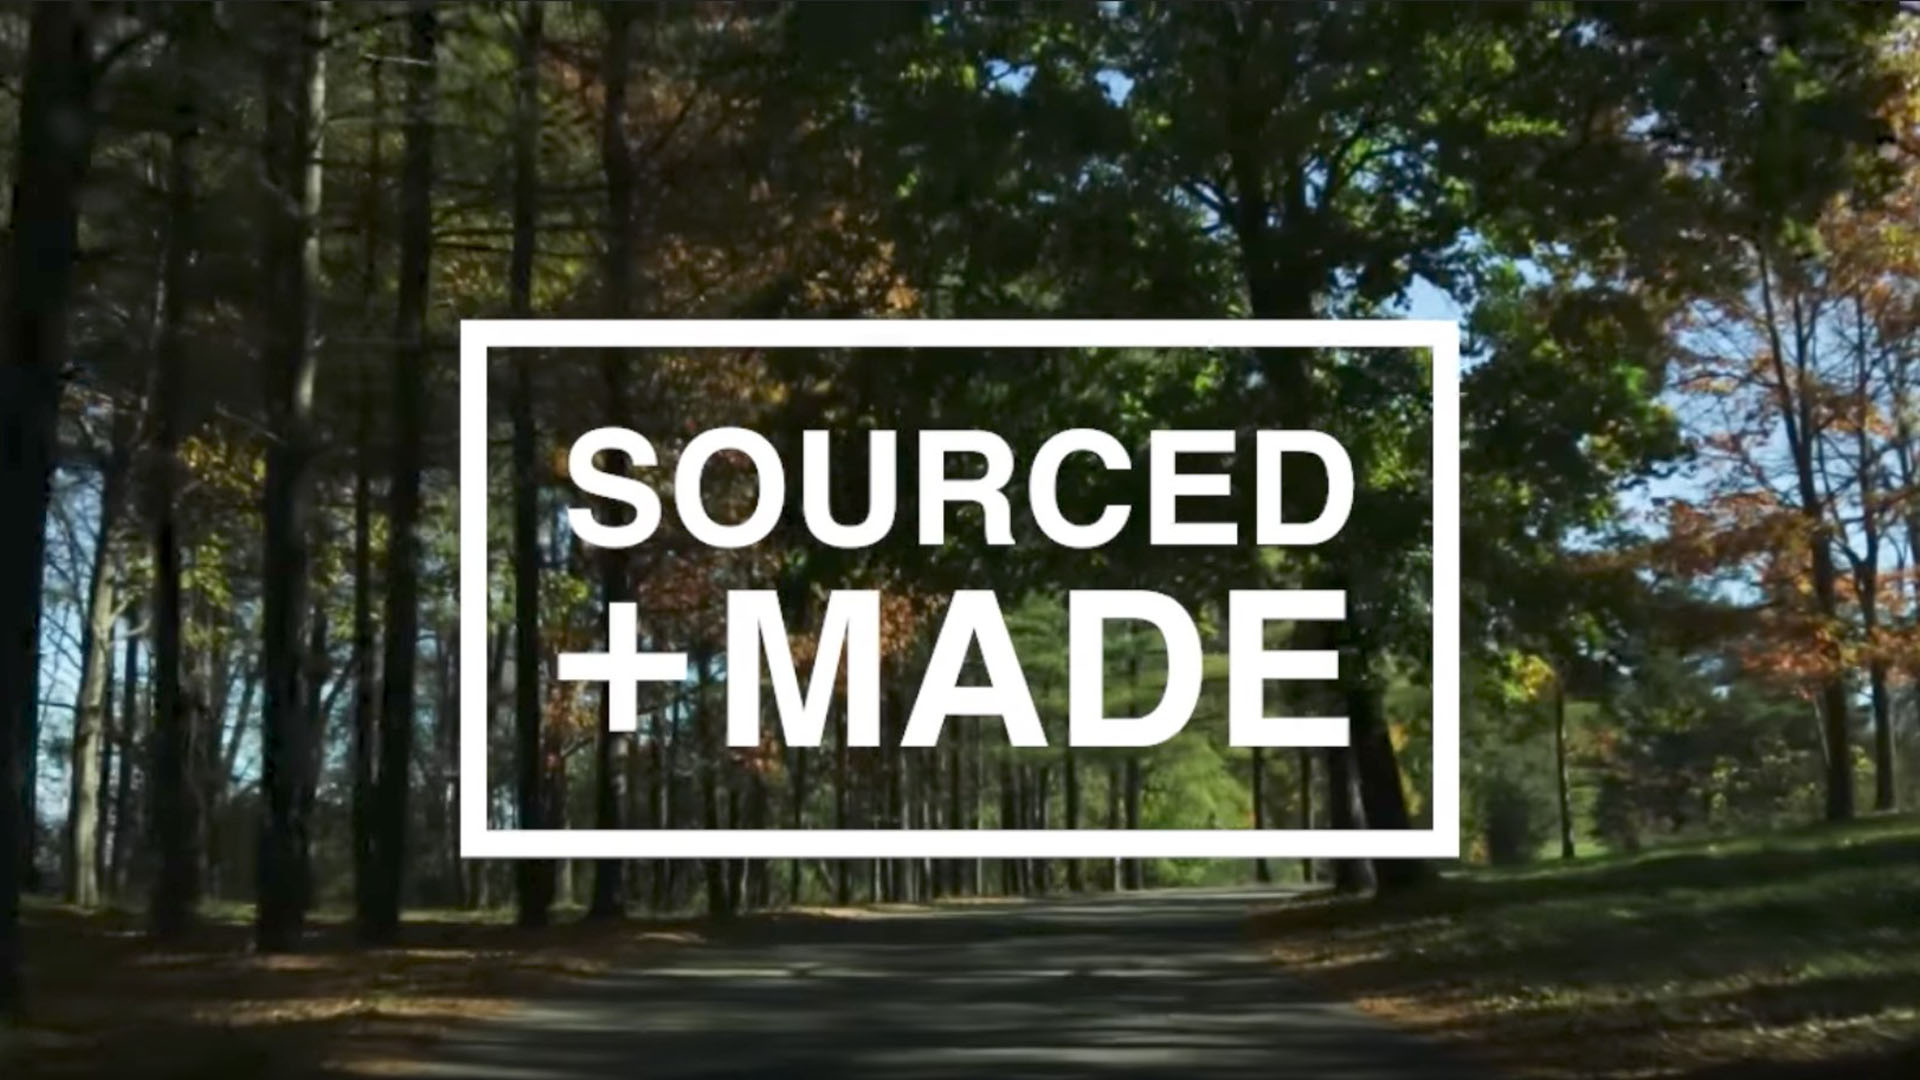 SOURCED+MADE